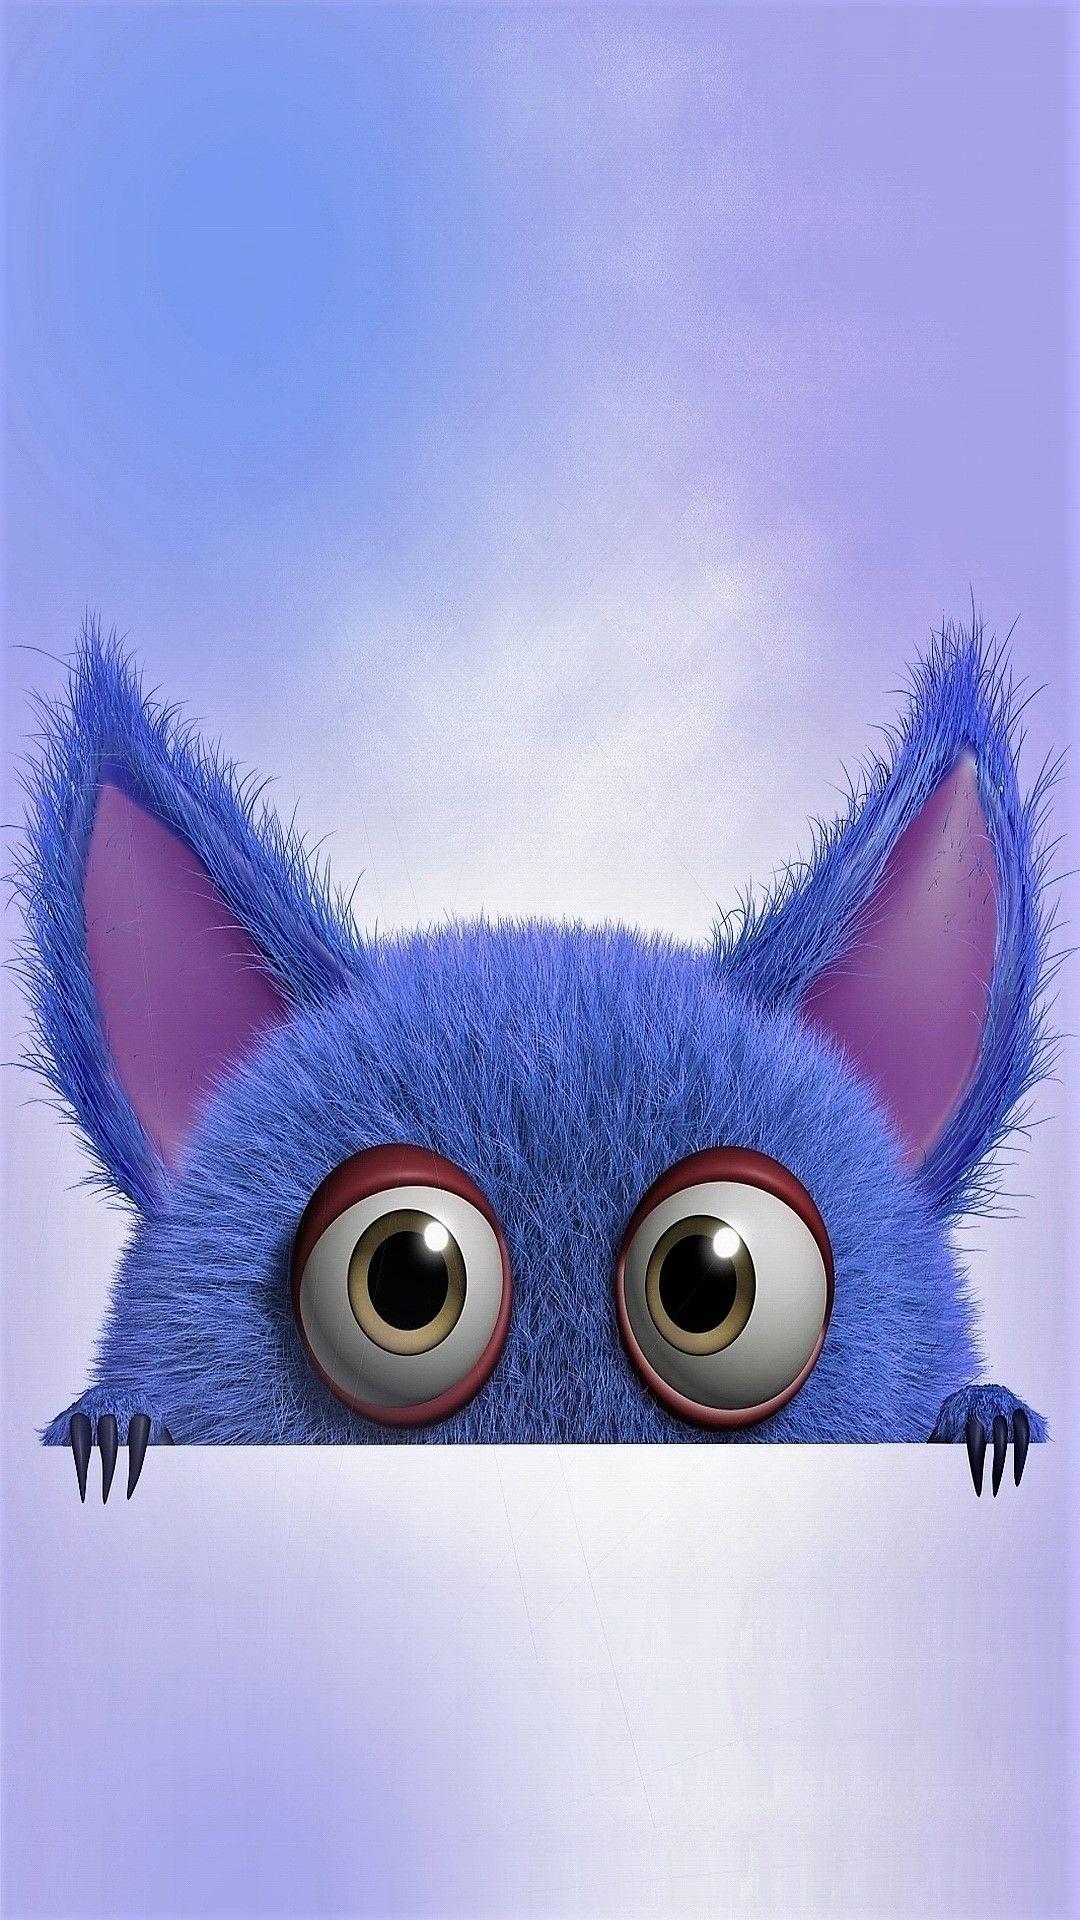 Blue monster to see more cute cartoon wallpaper!